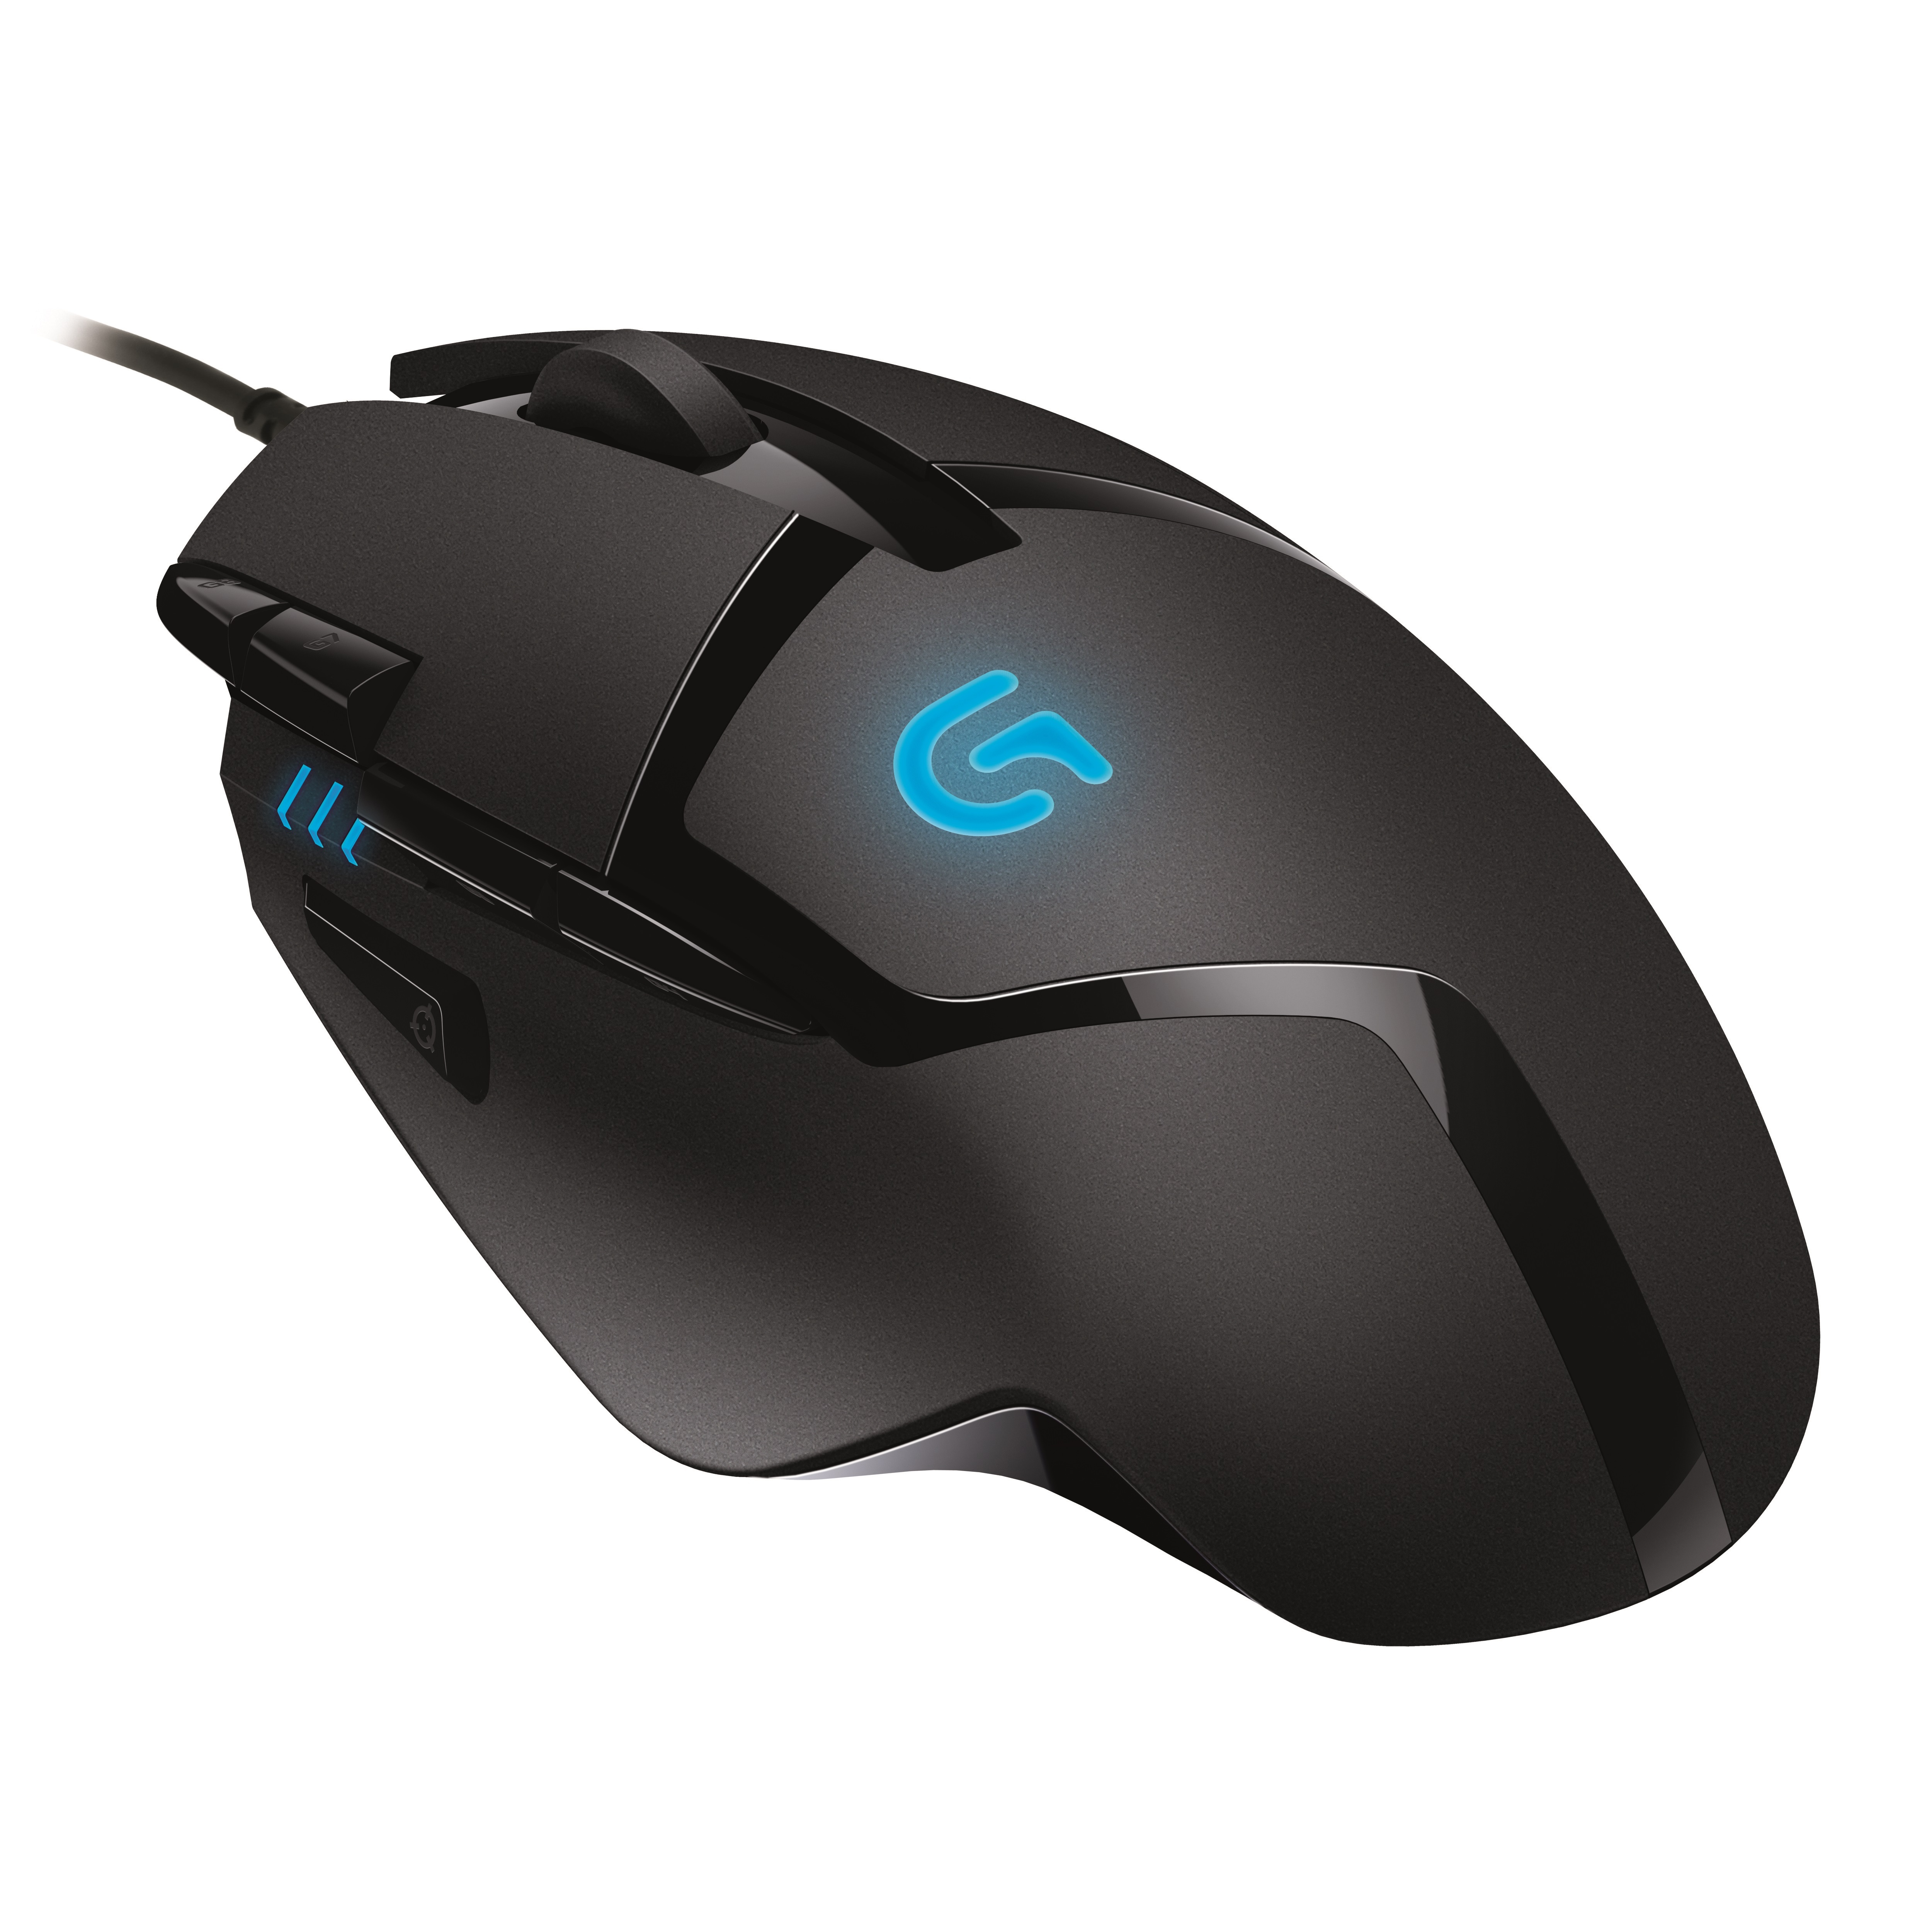 Logitech G402 Hyperion Fury Gaming Mouse Optical 4000DPI PC Laptop Computer Mice 